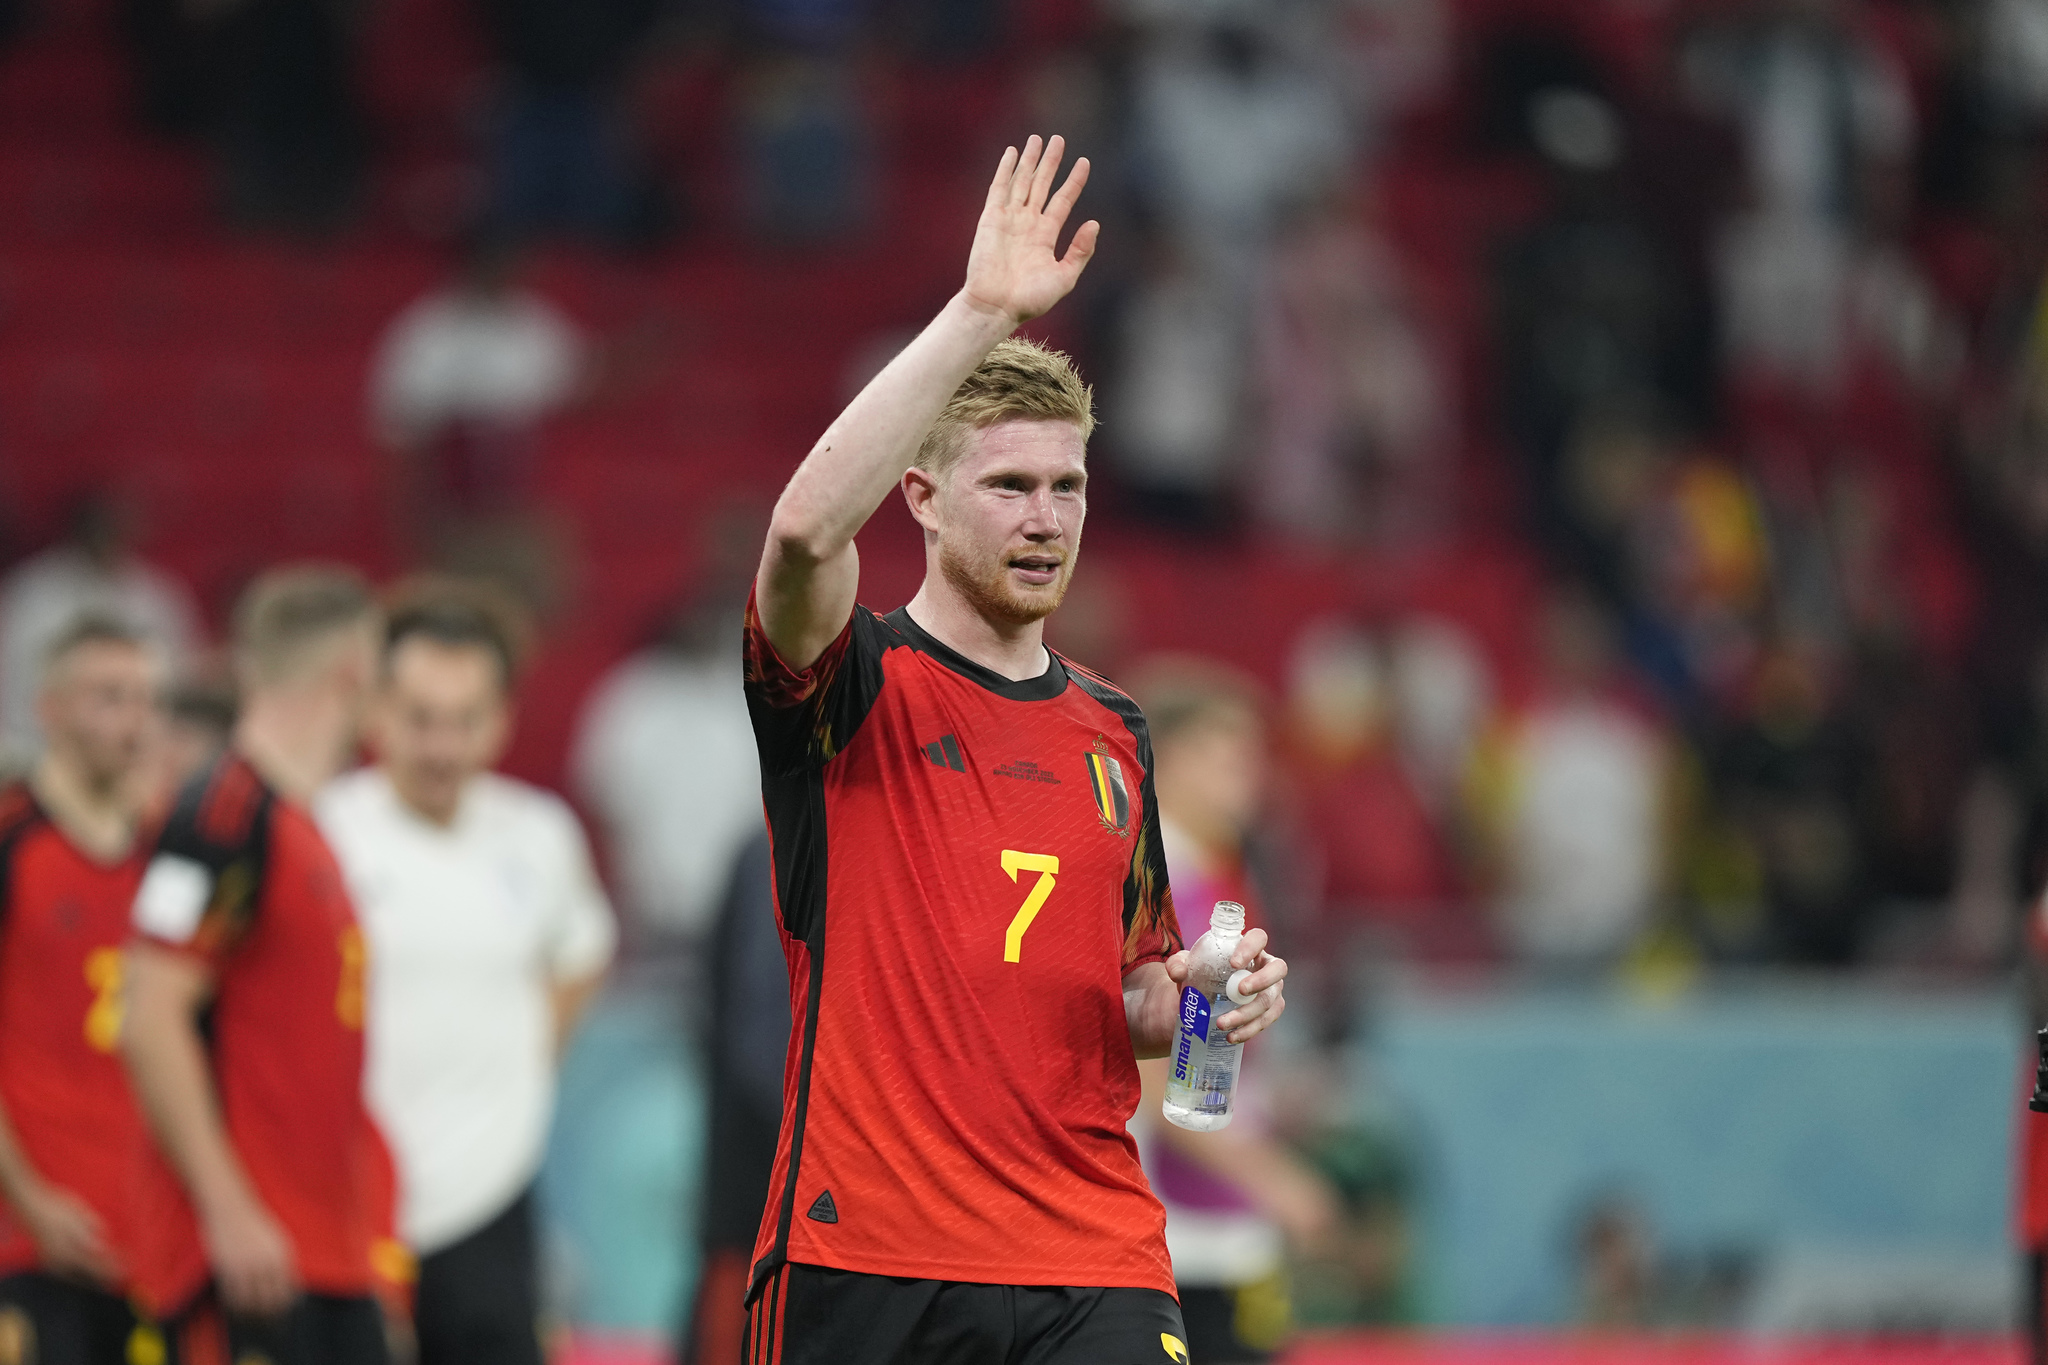 Belgium's Kevin De  lt;HIT gt;Bruyne lt;/HIT gt; waves fans at the end of the World Cup group F soccer match between Belgium and Canada, at the Ahmad Bin Ali Stadium in Doha, Qatar, Wednesday, Nov. 23, 2022. Belgium won 1-0. (AP Photo/Martin Meissner)